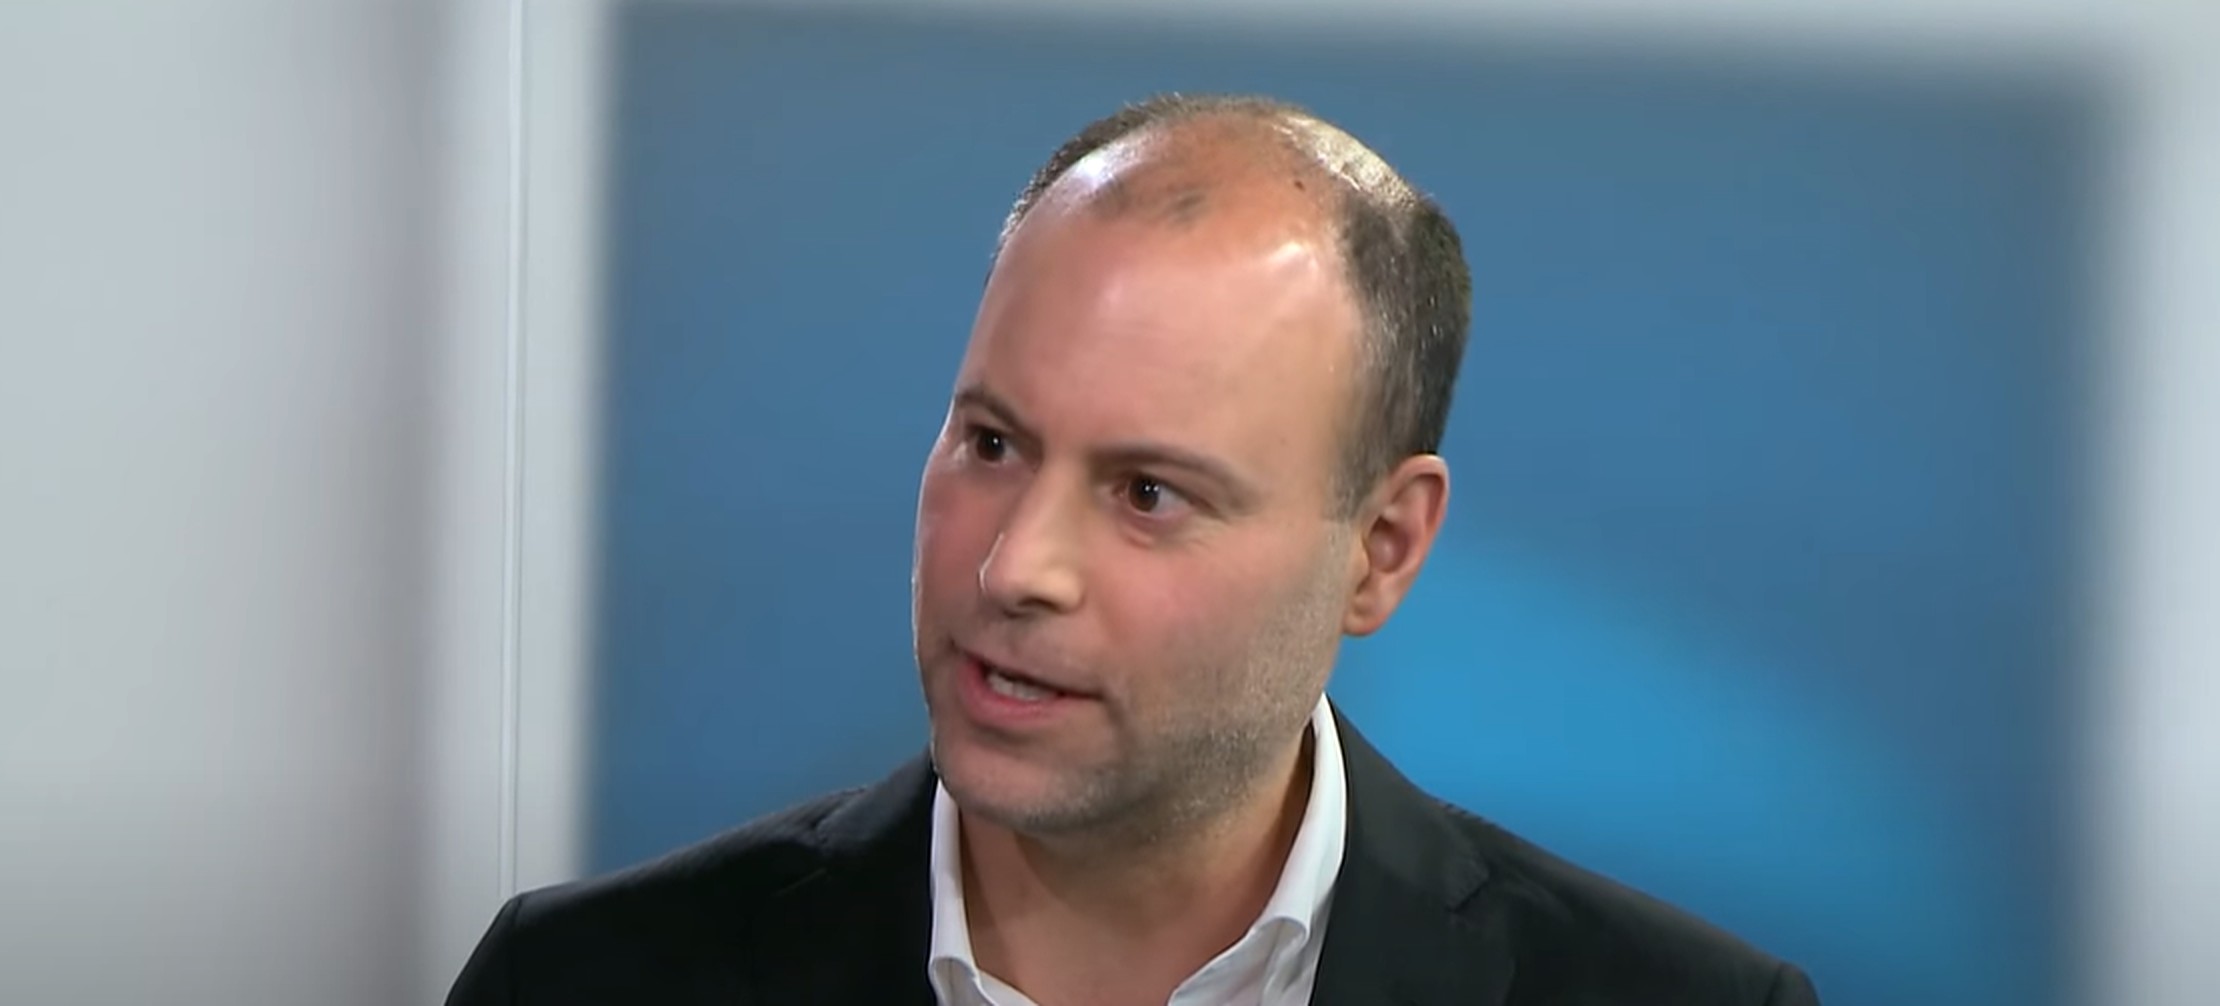 Noel Biderman Now: Where is Ashley Madison's Ex-CEO Today? Update